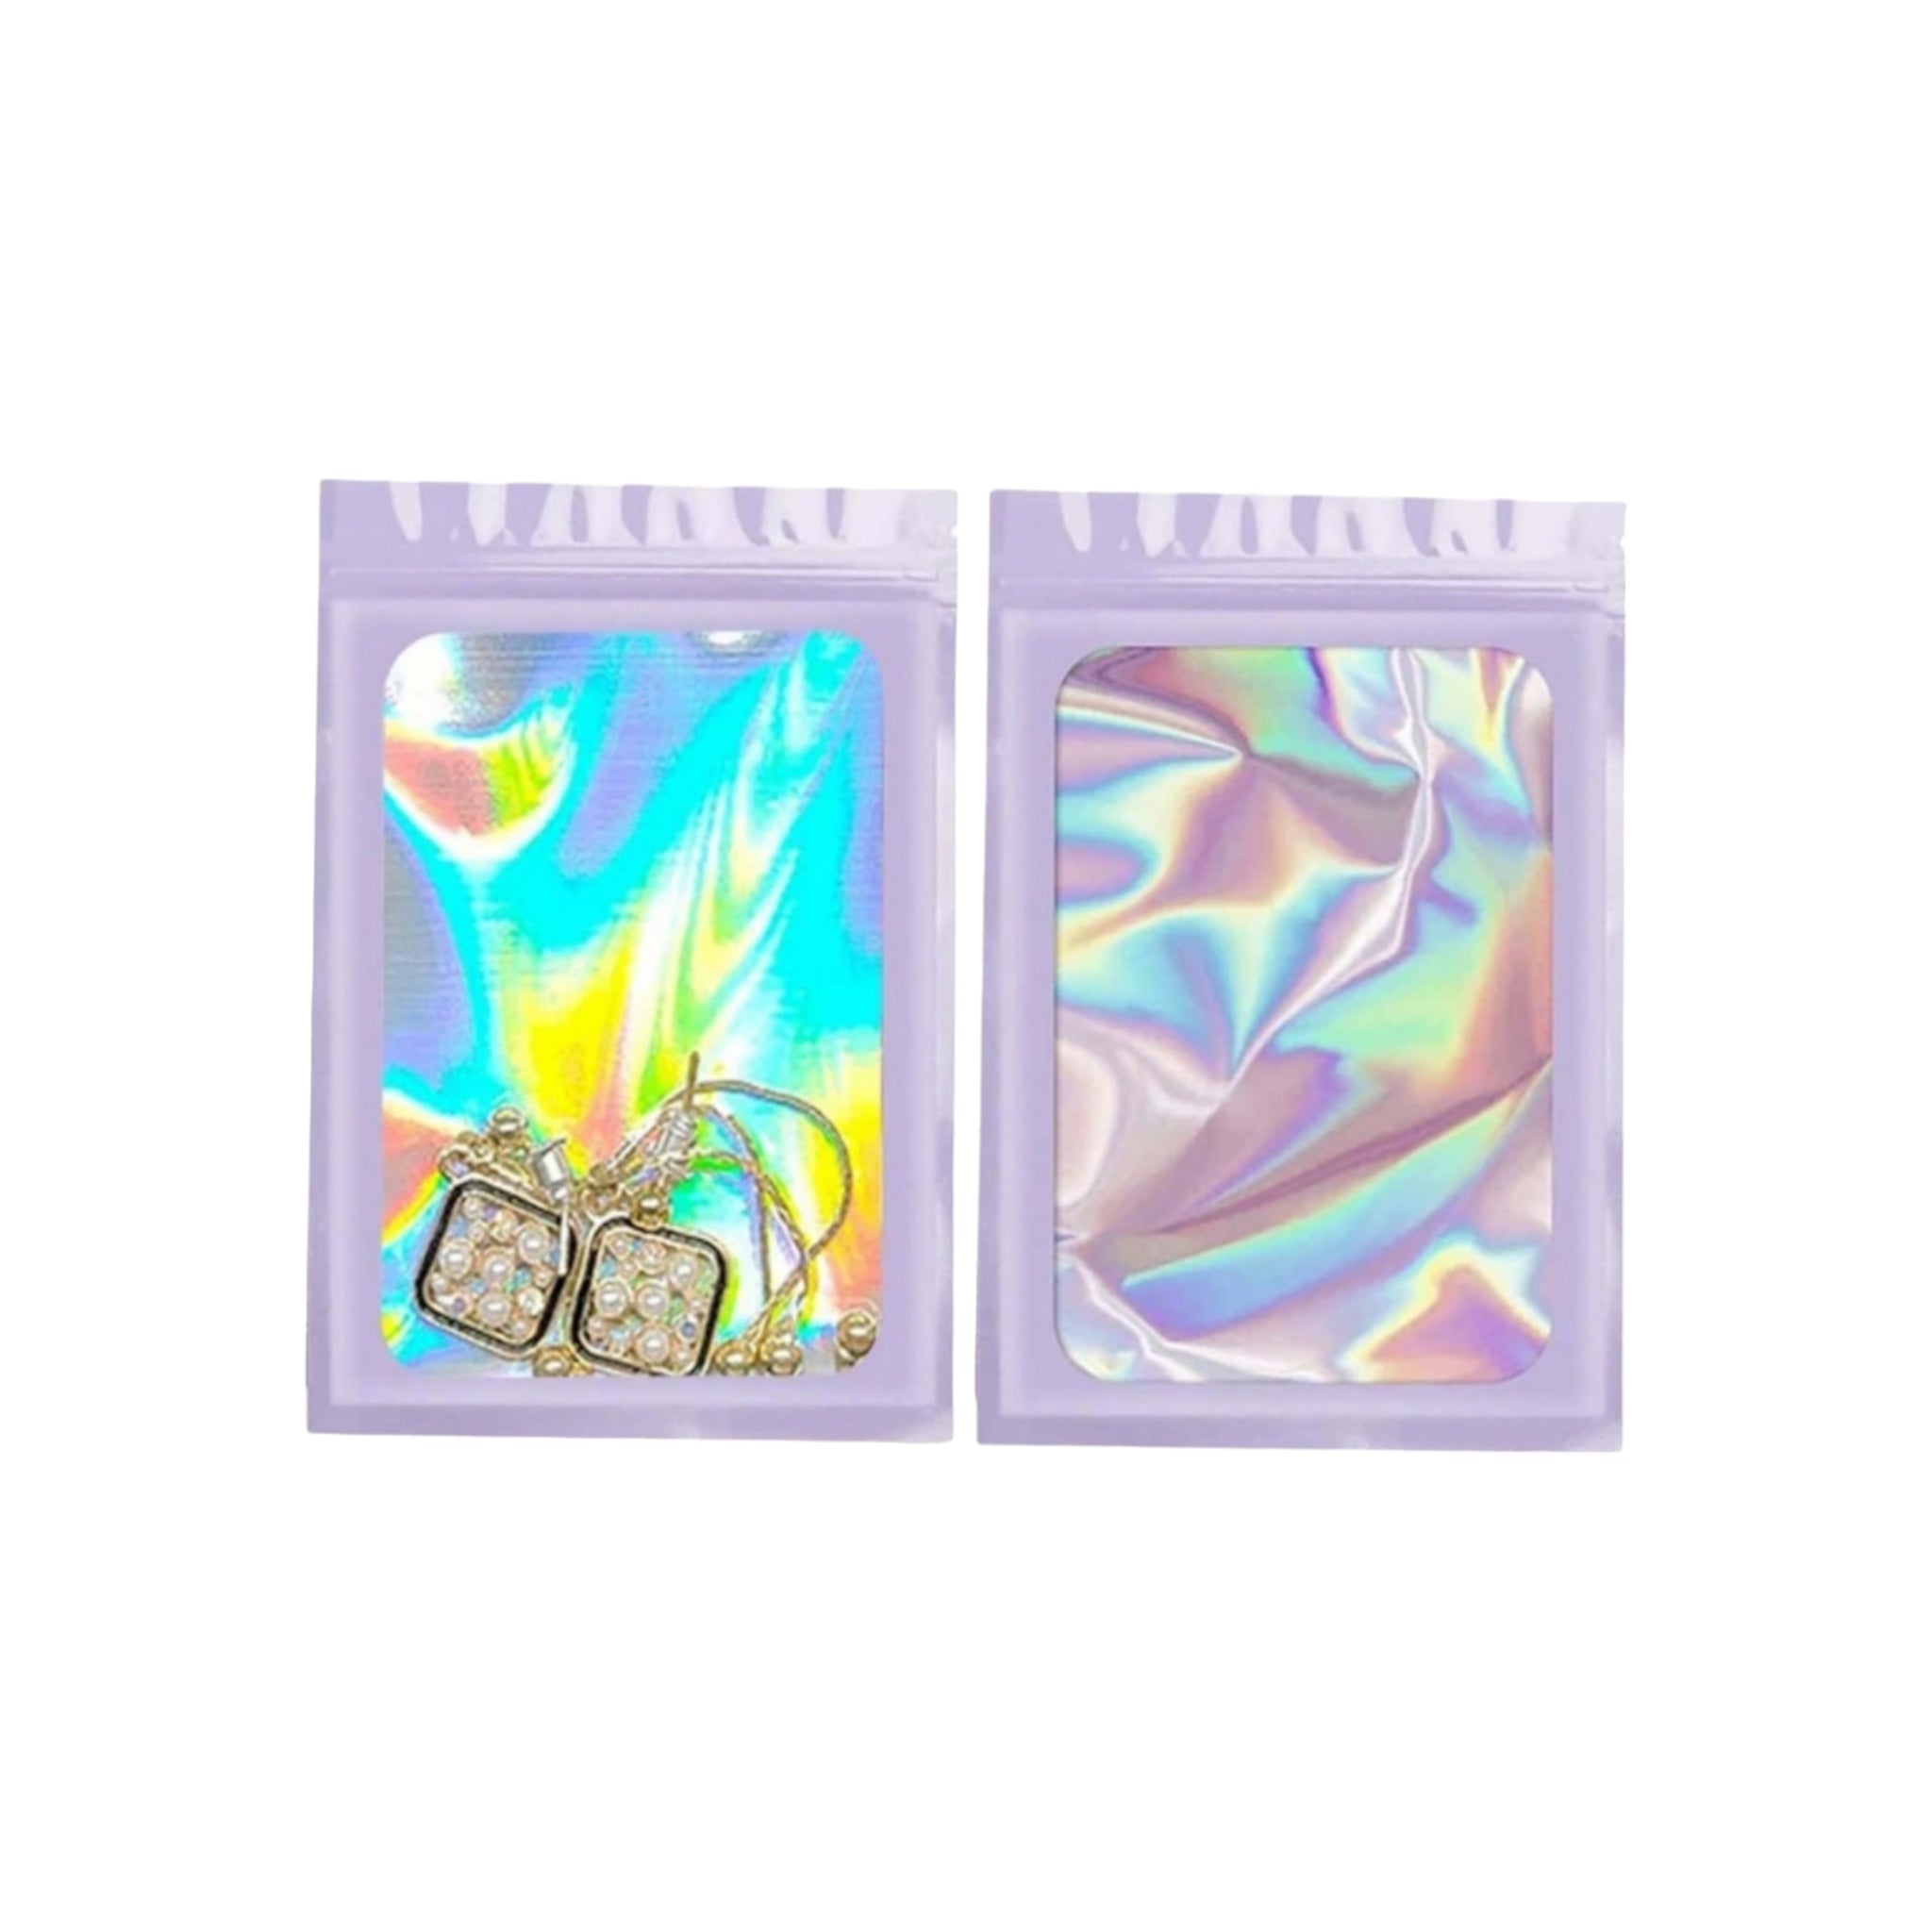 Holographic Resealable Mylar Pouch Bags Full Window Display 10pack